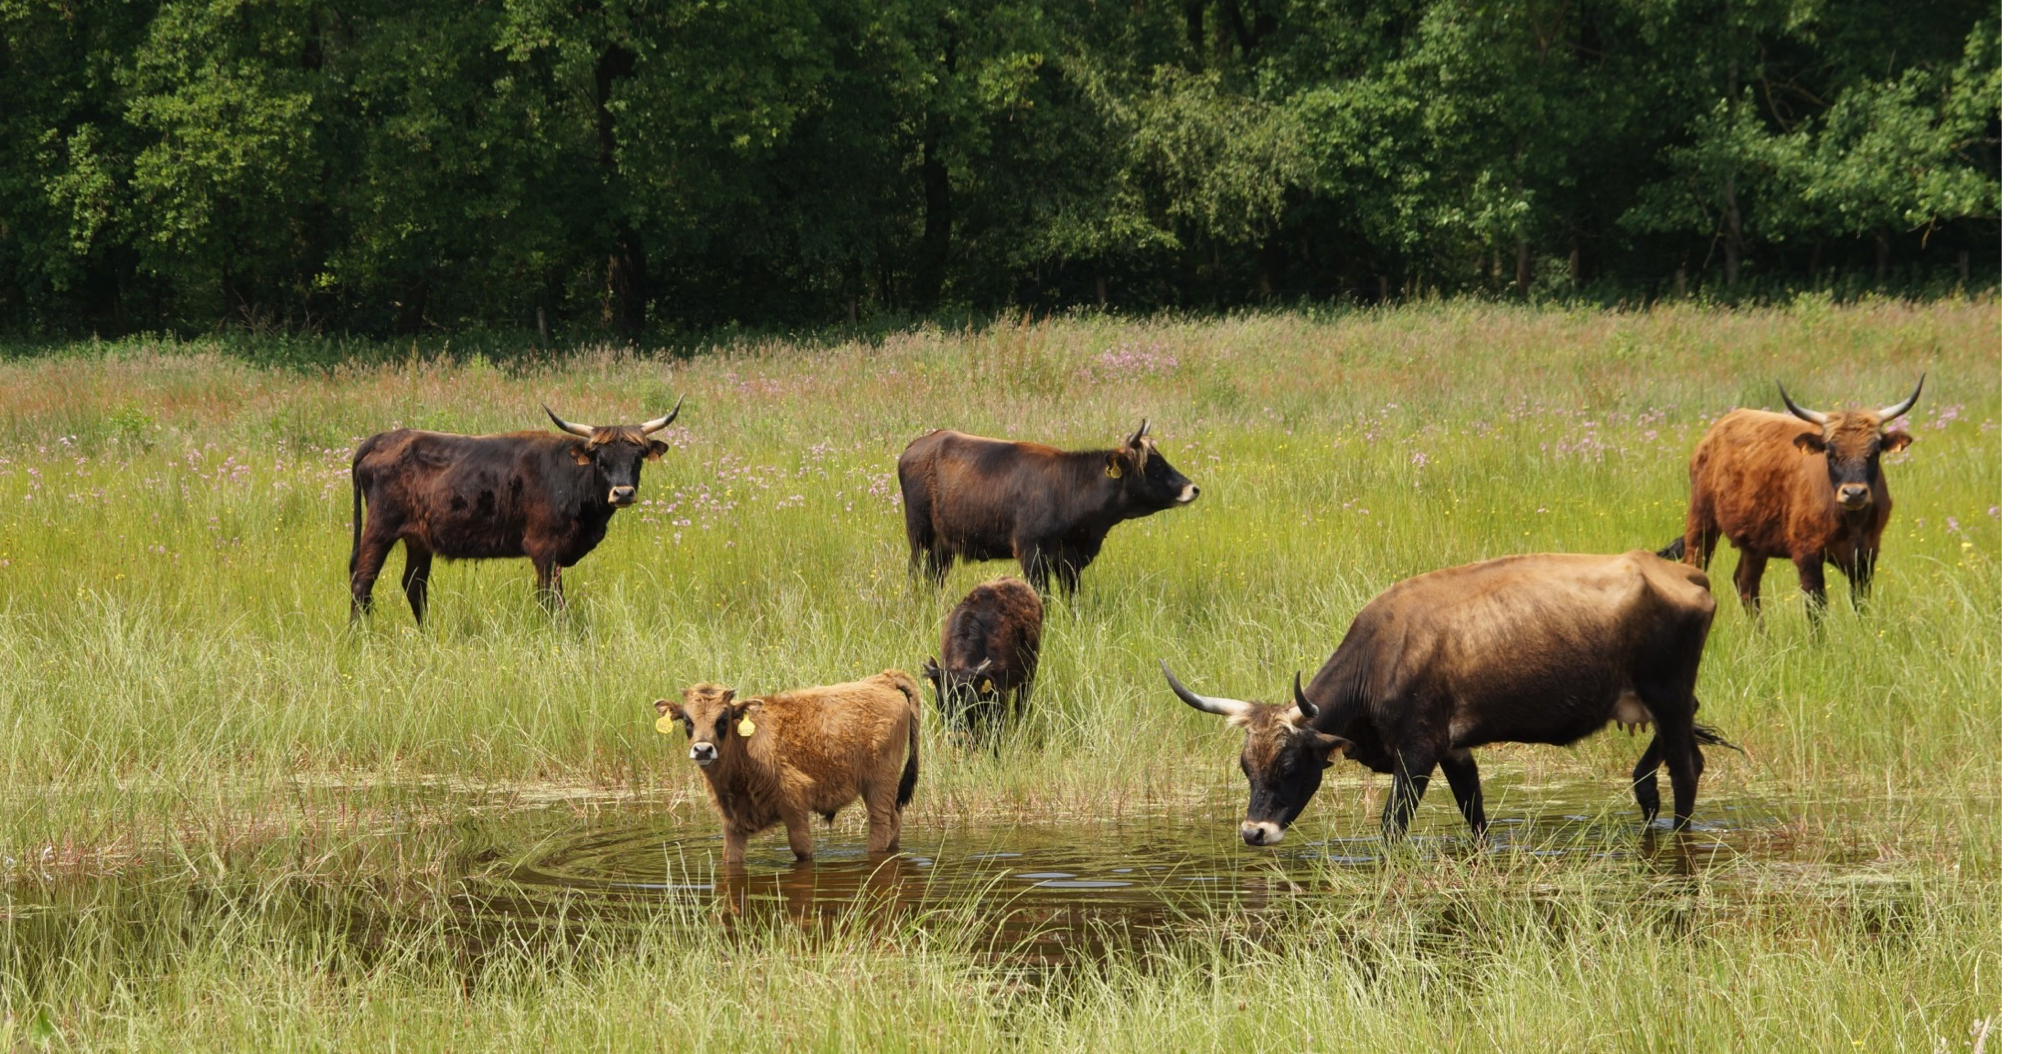 The three-year, pan-European preparatory LIFE project will evaluate the effectiveness of various grazing management models - involving both fully domesticated and wild/semi-wild herbivores.